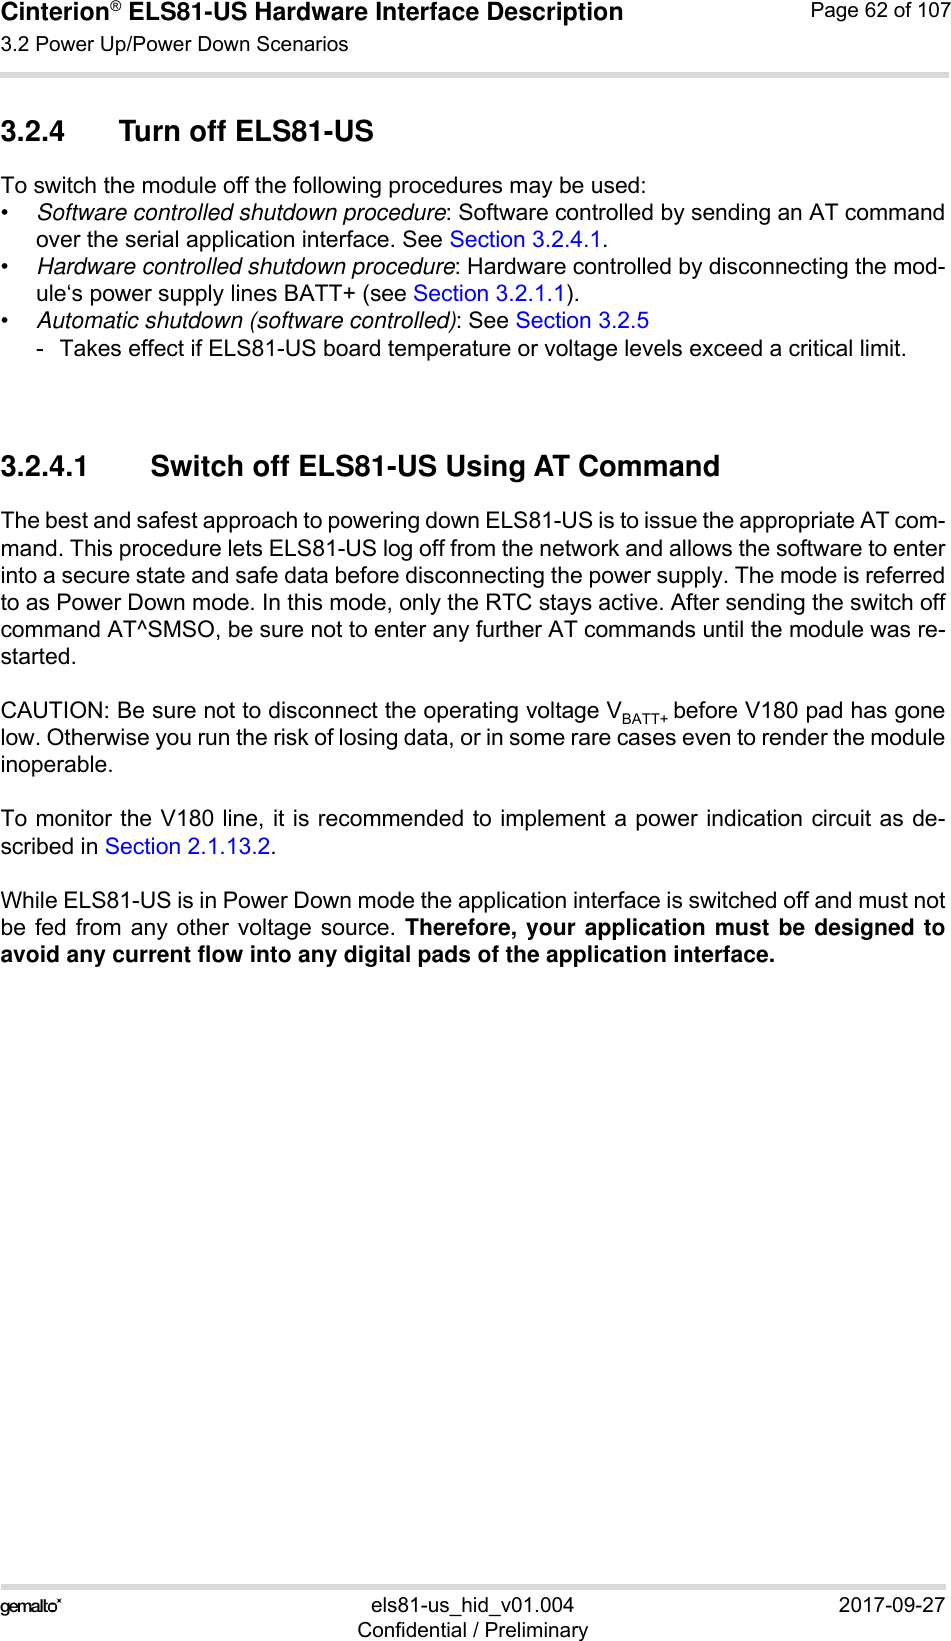 Cinterion® ELS81-US Hardware Interface Description3.2 Power Up/Power Down Scenarios77els81-us_hid_v01.004 2017-09-27Confidential / PreliminaryPage 62 of 1073.2.4 Turn off ELS81-USTo switch the module off the following procedures may be used: •Software controlled shutdown procedure: Software controlled by sending an AT commandover the serial application interface. See Section 3.2.4.1.•Hardware controlled shutdown procedure: Hardware controlled by disconnecting the mod-ule‘s power supply lines BATT+ (see Section 3.2.1.1).•Automatic shutdown (software controlled): See Section 3.2.5- Takes effect if ELS81-US board temperature or voltage levels exceed a critical limit.3.2.4.1 Switch off ELS81-US Using AT CommandThe best and safest approach to powering down ELS81-US is to issue the appropriate AT com-mand. This procedure lets ELS81-US log off from the network and allows the software to enterinto a secure state and safe data before disconnecting the power supply. The mode is referredto as Power Down mode. In this mode, only the RTC stays active. After sending the switch offcommand AT^SMSO, be sure not to enter any further AT commands until the module was re-started. CAUTION: Be sure not to disconnect the operating voltage VBATT+ before V180 pad has gonelow. Otherwise you run the risk of losing data, or in some rare cases even to render the moduleinoperable. To monitor the V180 line, it is recommended to implement a power indication circuit as de-scribed in Section 2.1.13.2. While ELS81-US is in Power Down mode the application interface is switched off and must notbe fed from any other voltage source. Therefore, your application must be designed toavoid any current flow into any digital pads of the application interface. 